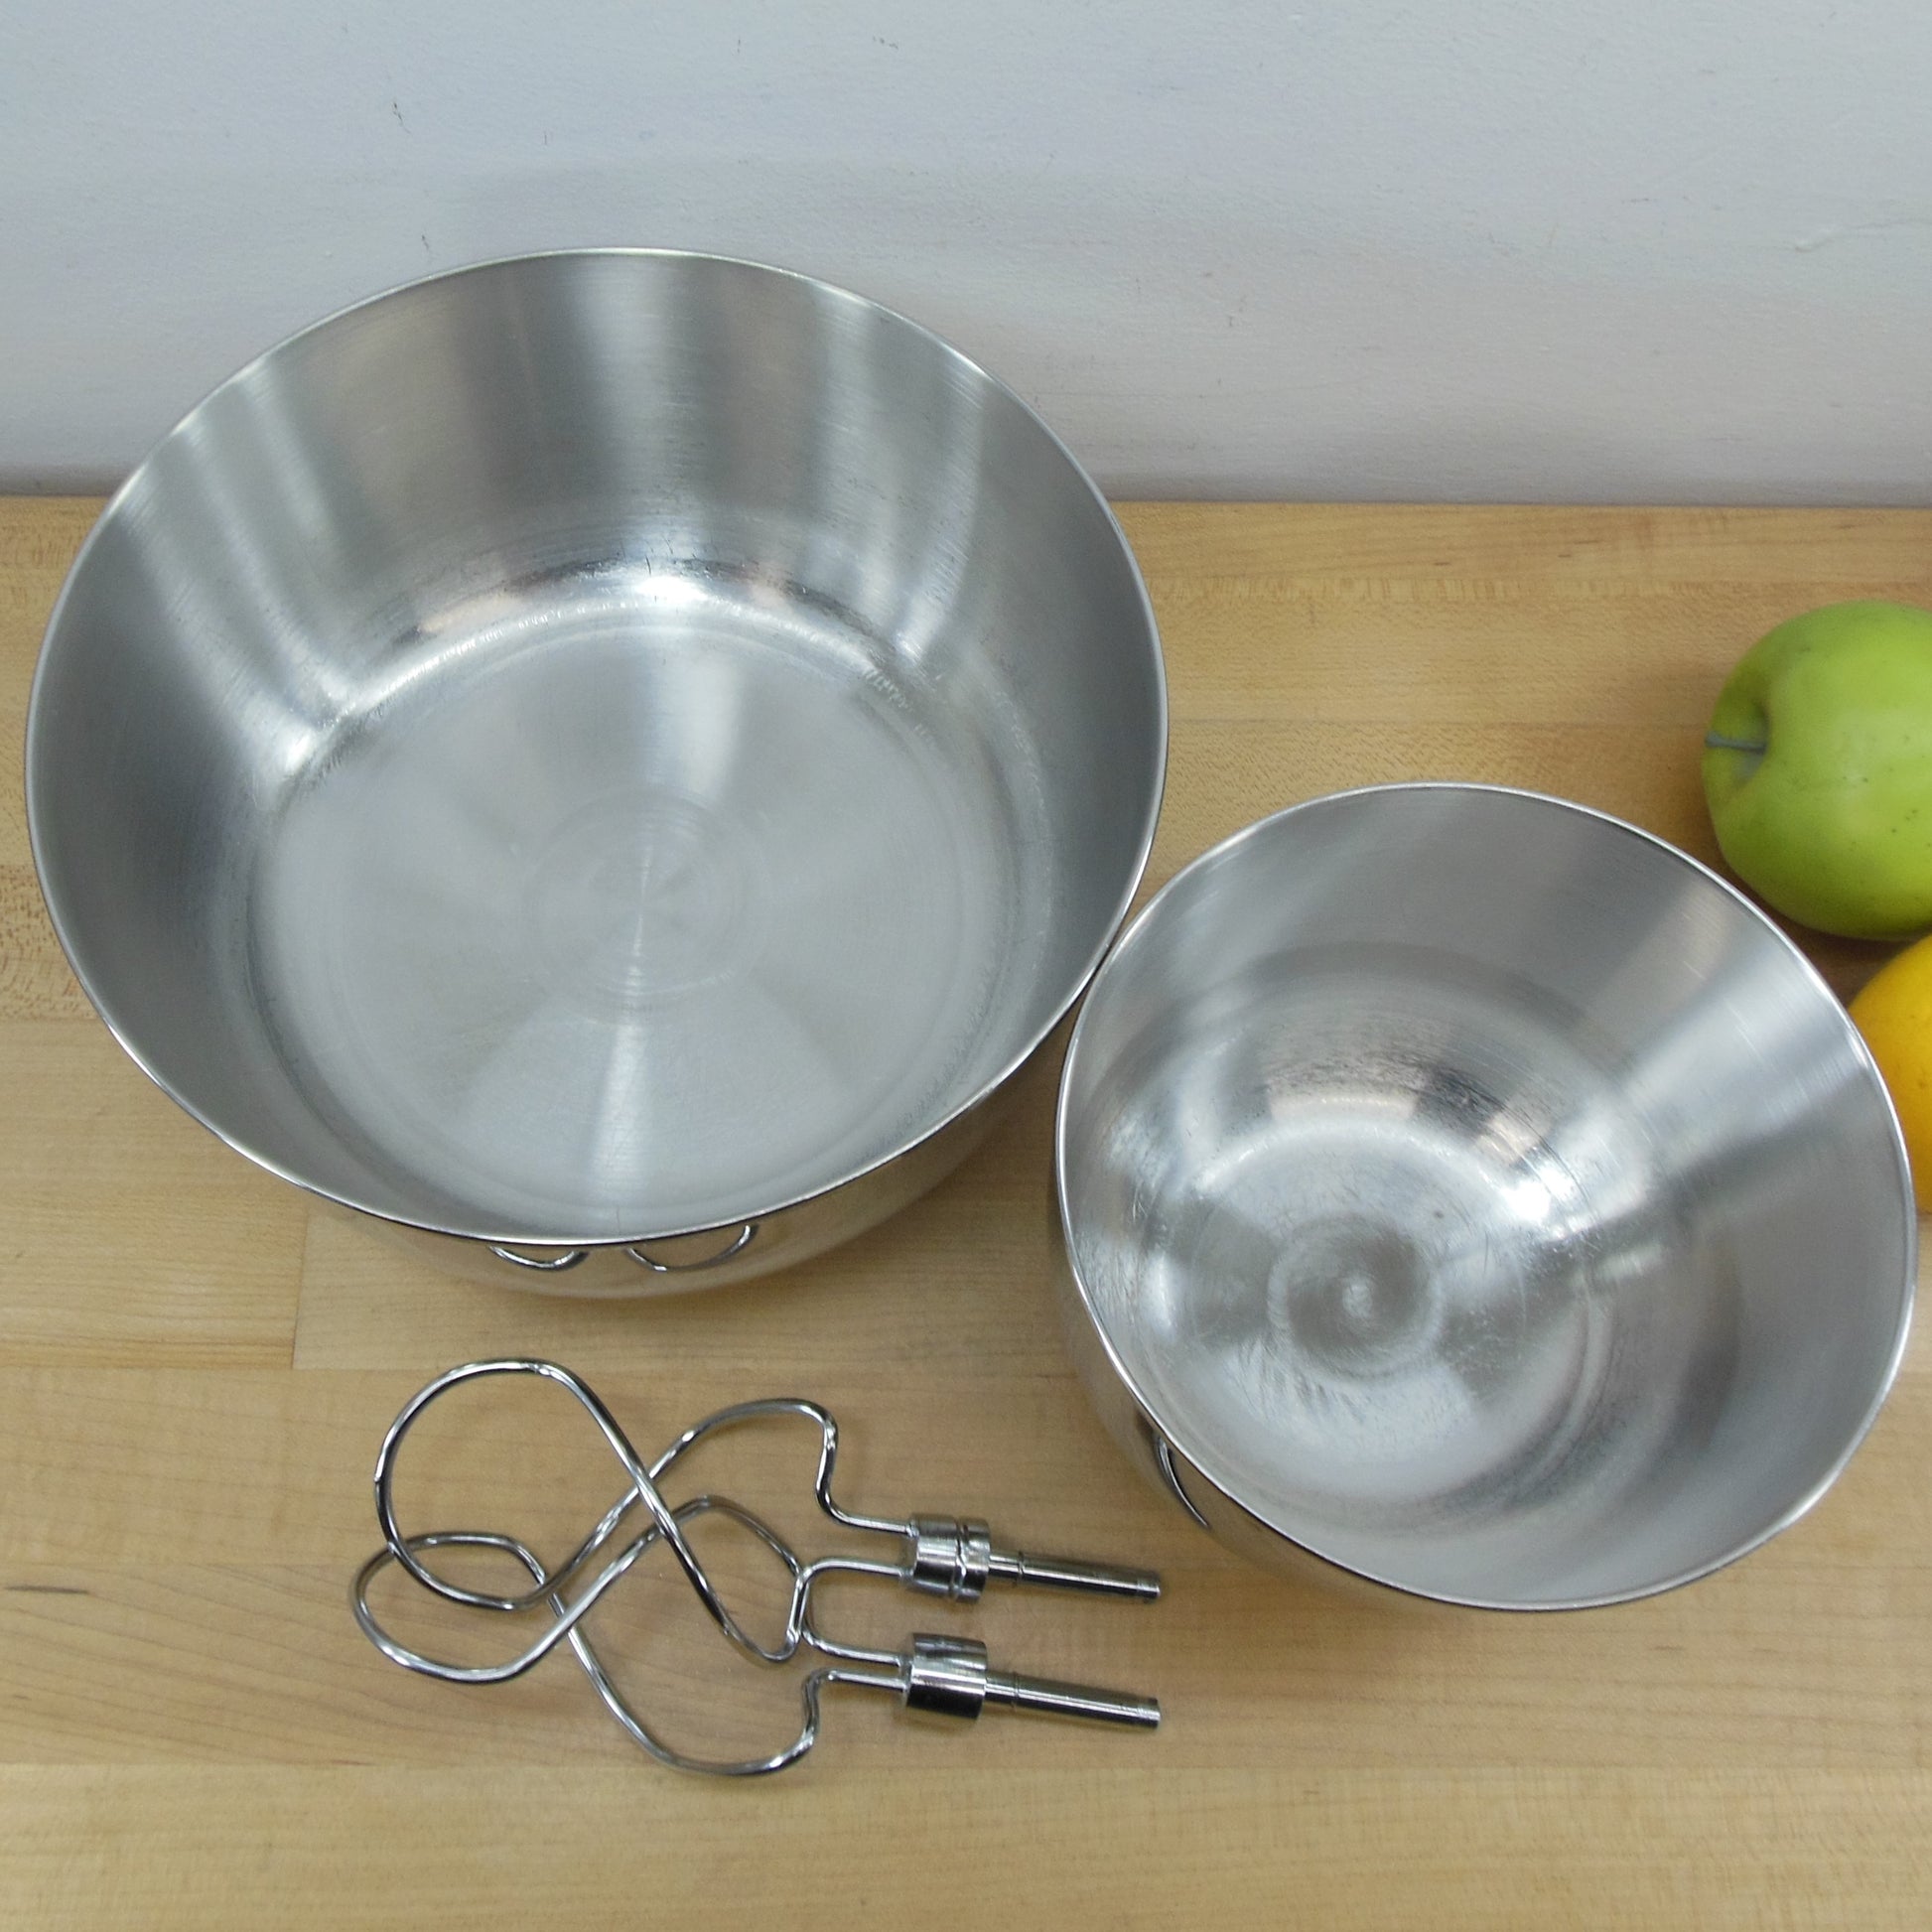 Mixmaster 2 Replacement Bowls 1 Large 1 Small Sunbeam Hamilton Stainless  Steel